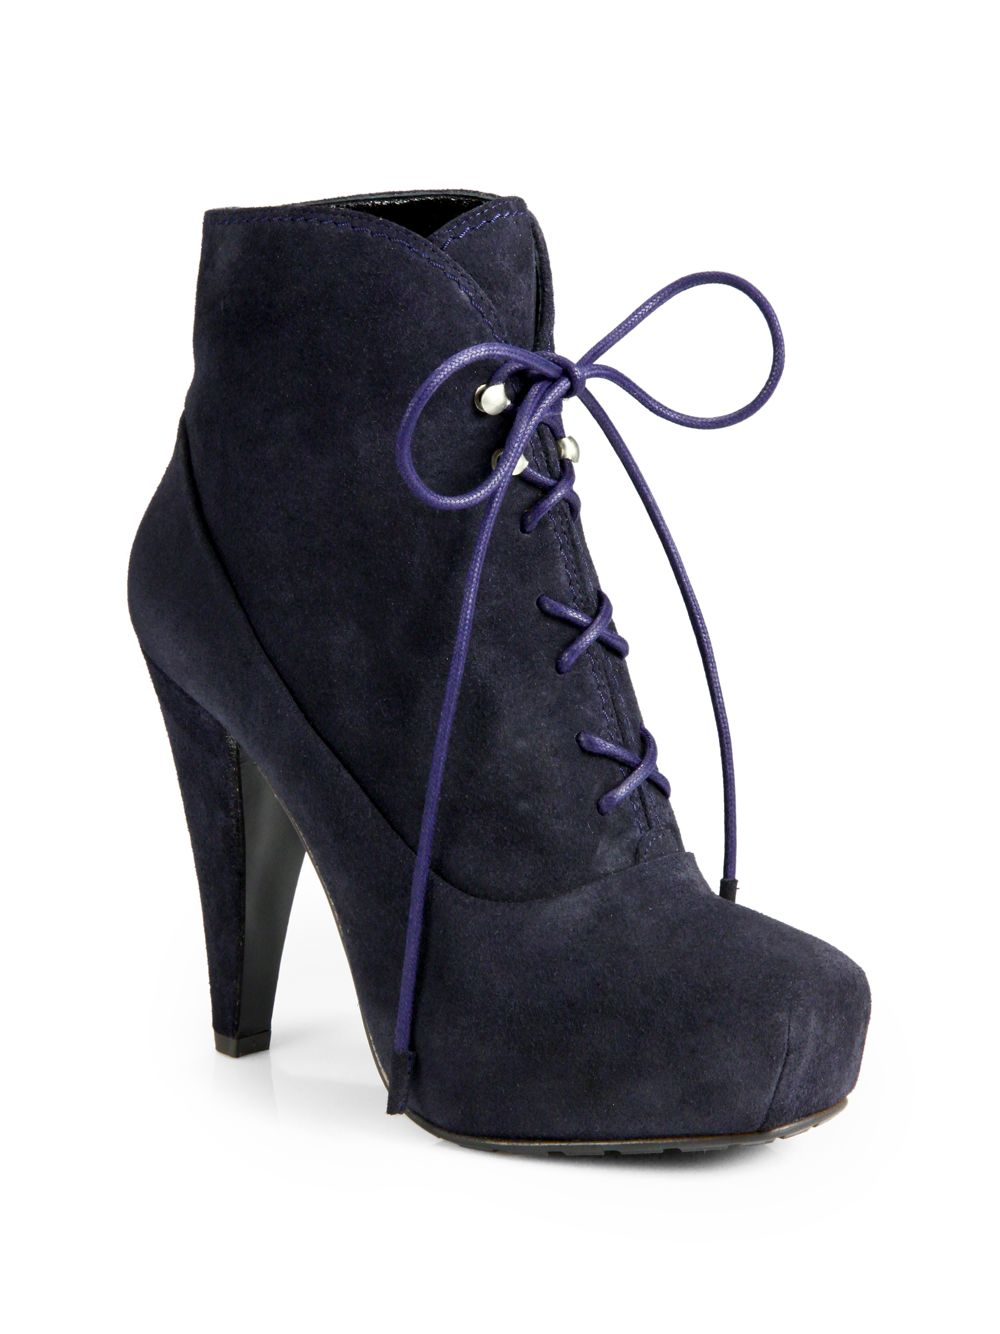 Proenza Schouler Suede Laceup Platform Ankle Boots in Blue (navy) | Lyst